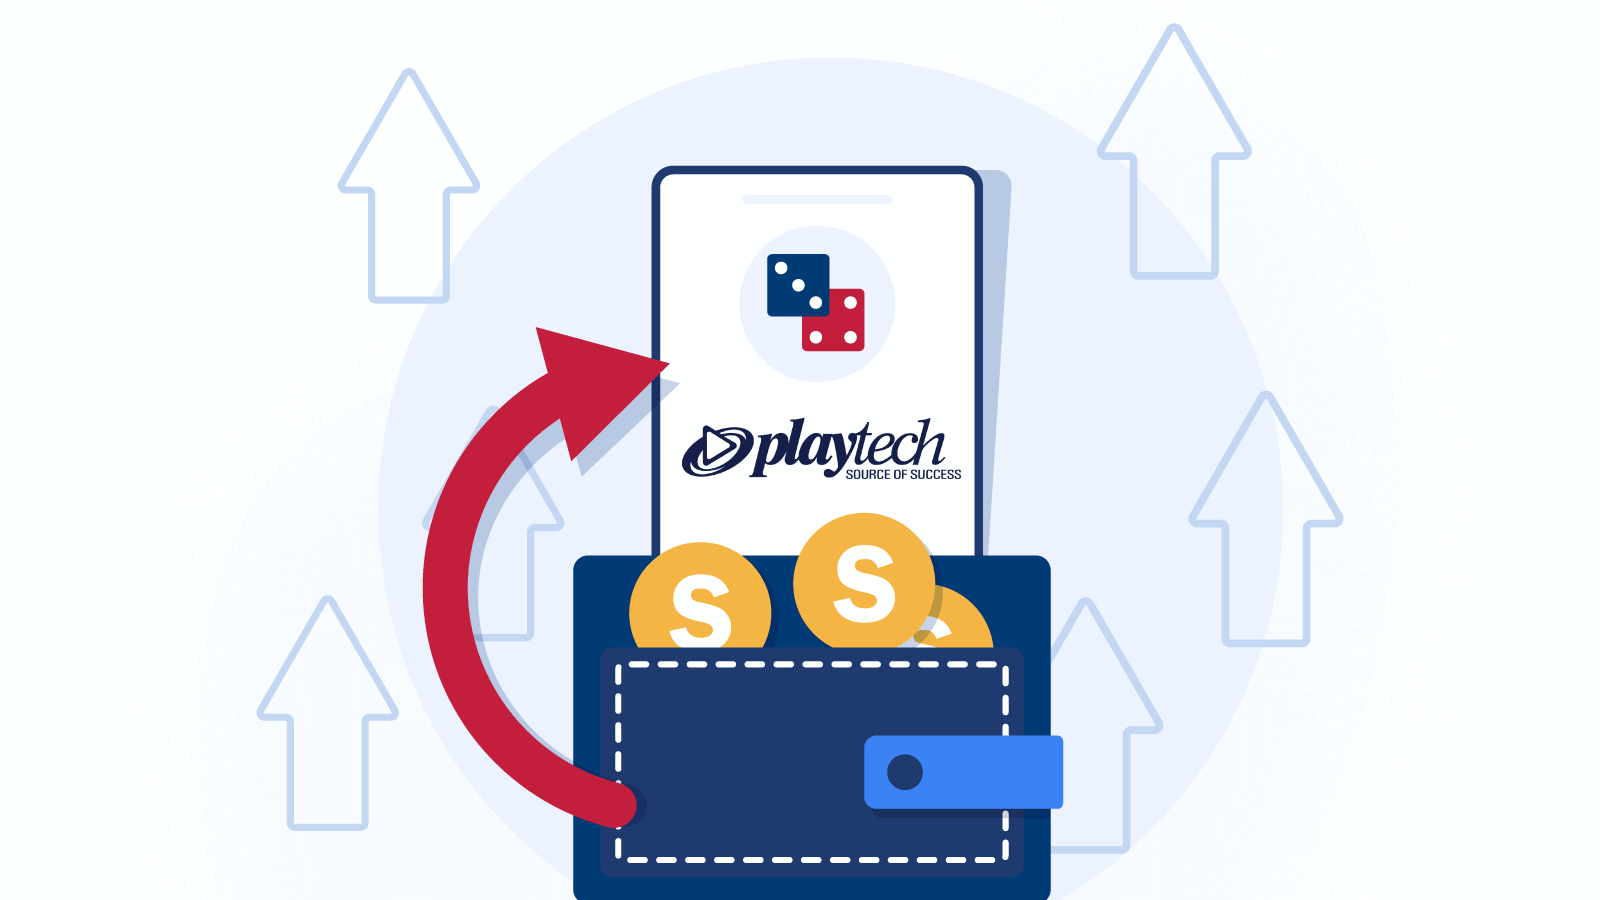 How to Pay at Playtech Casino Sites